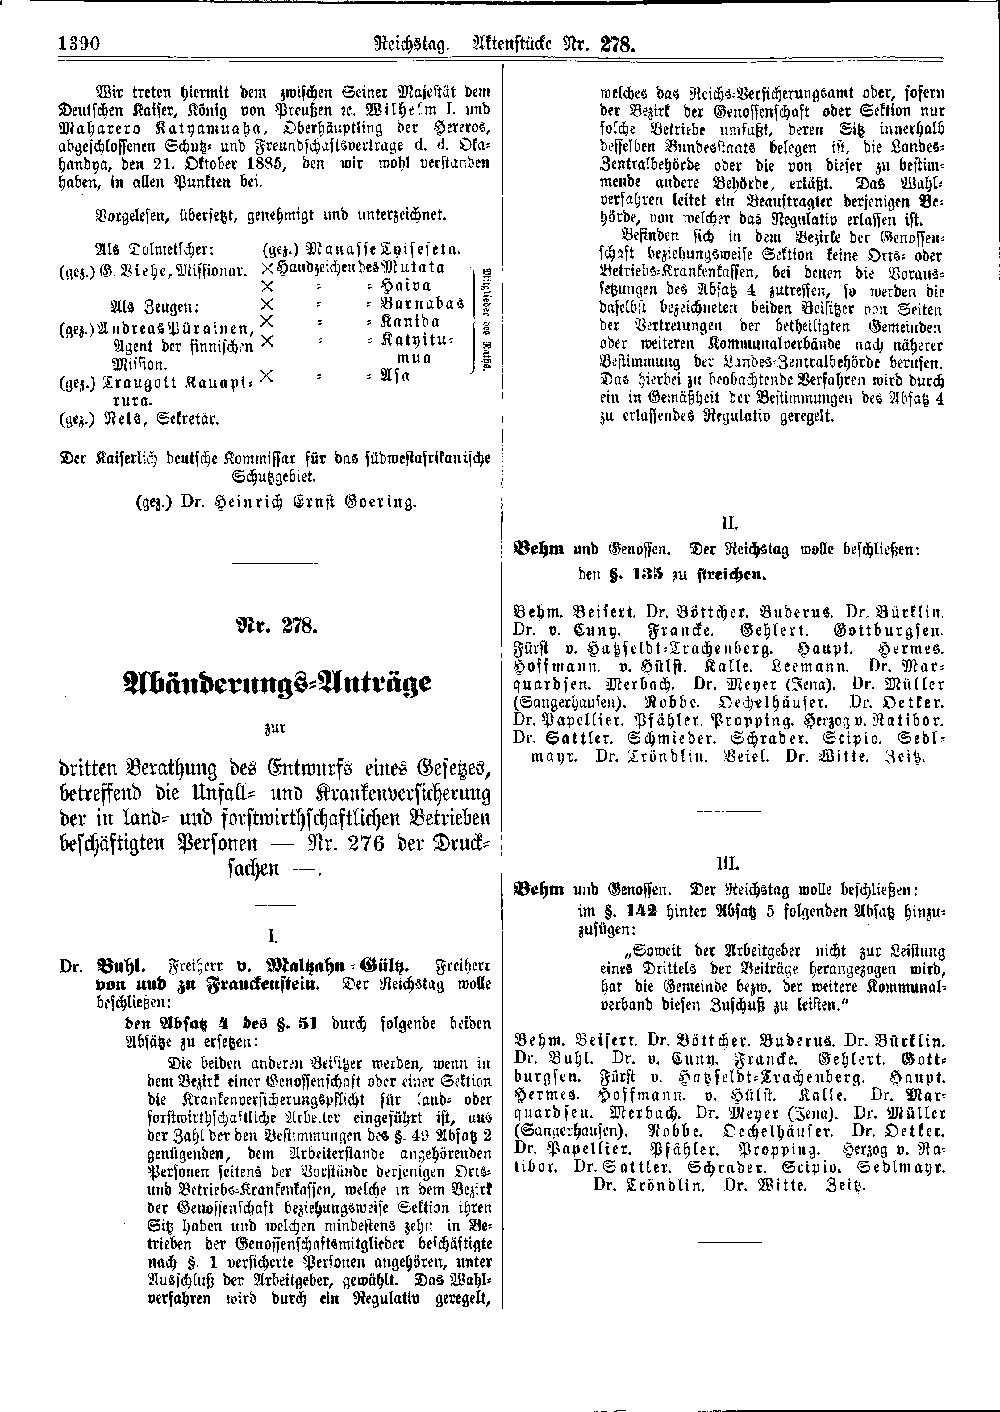 Scan of page 1390